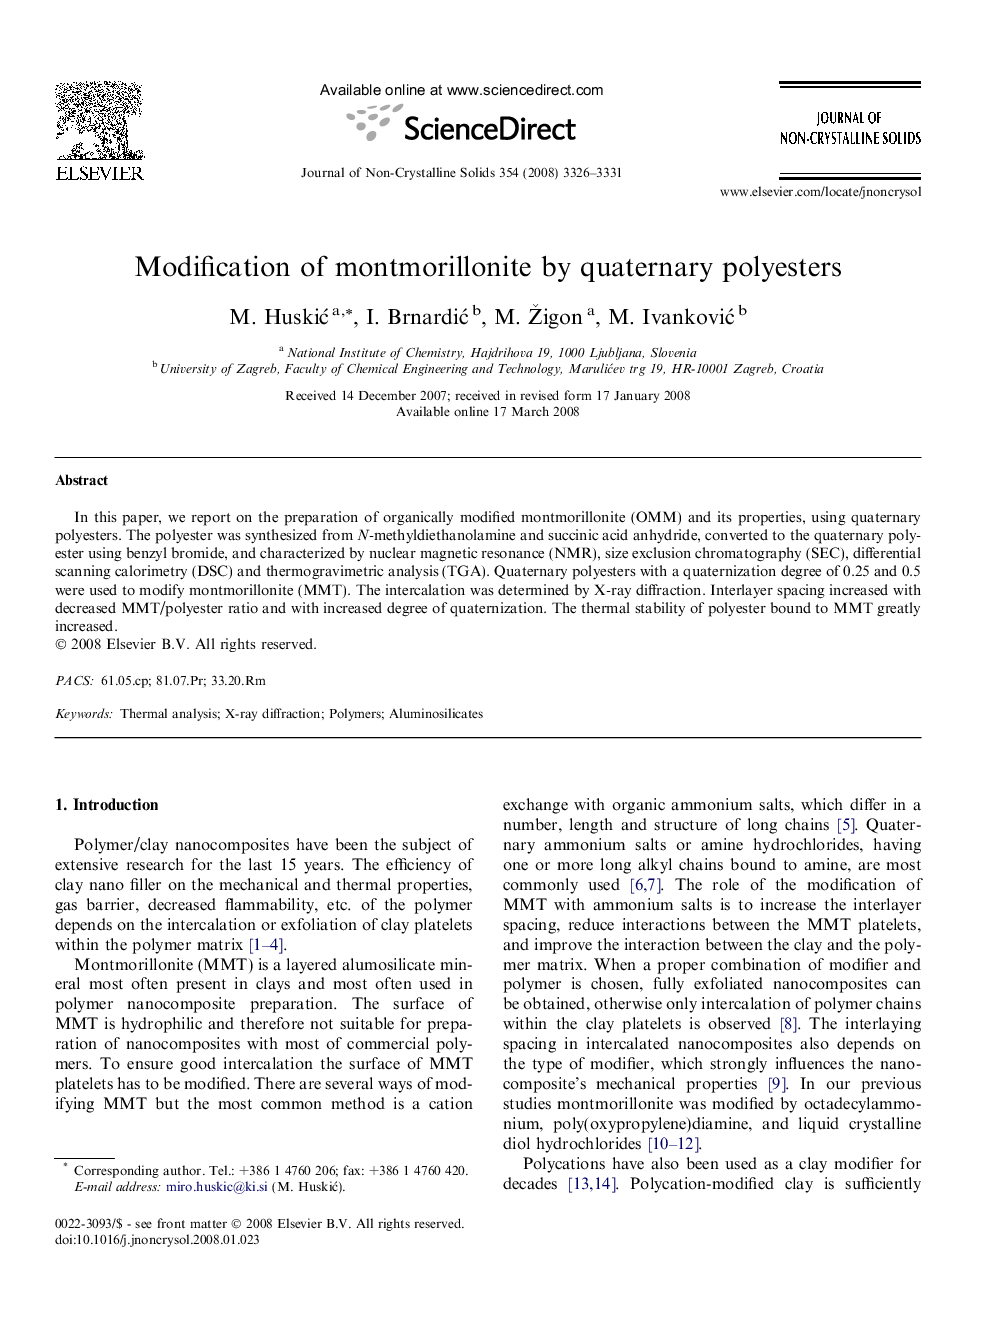 Modification of montmorillonite by quaternary polyesters